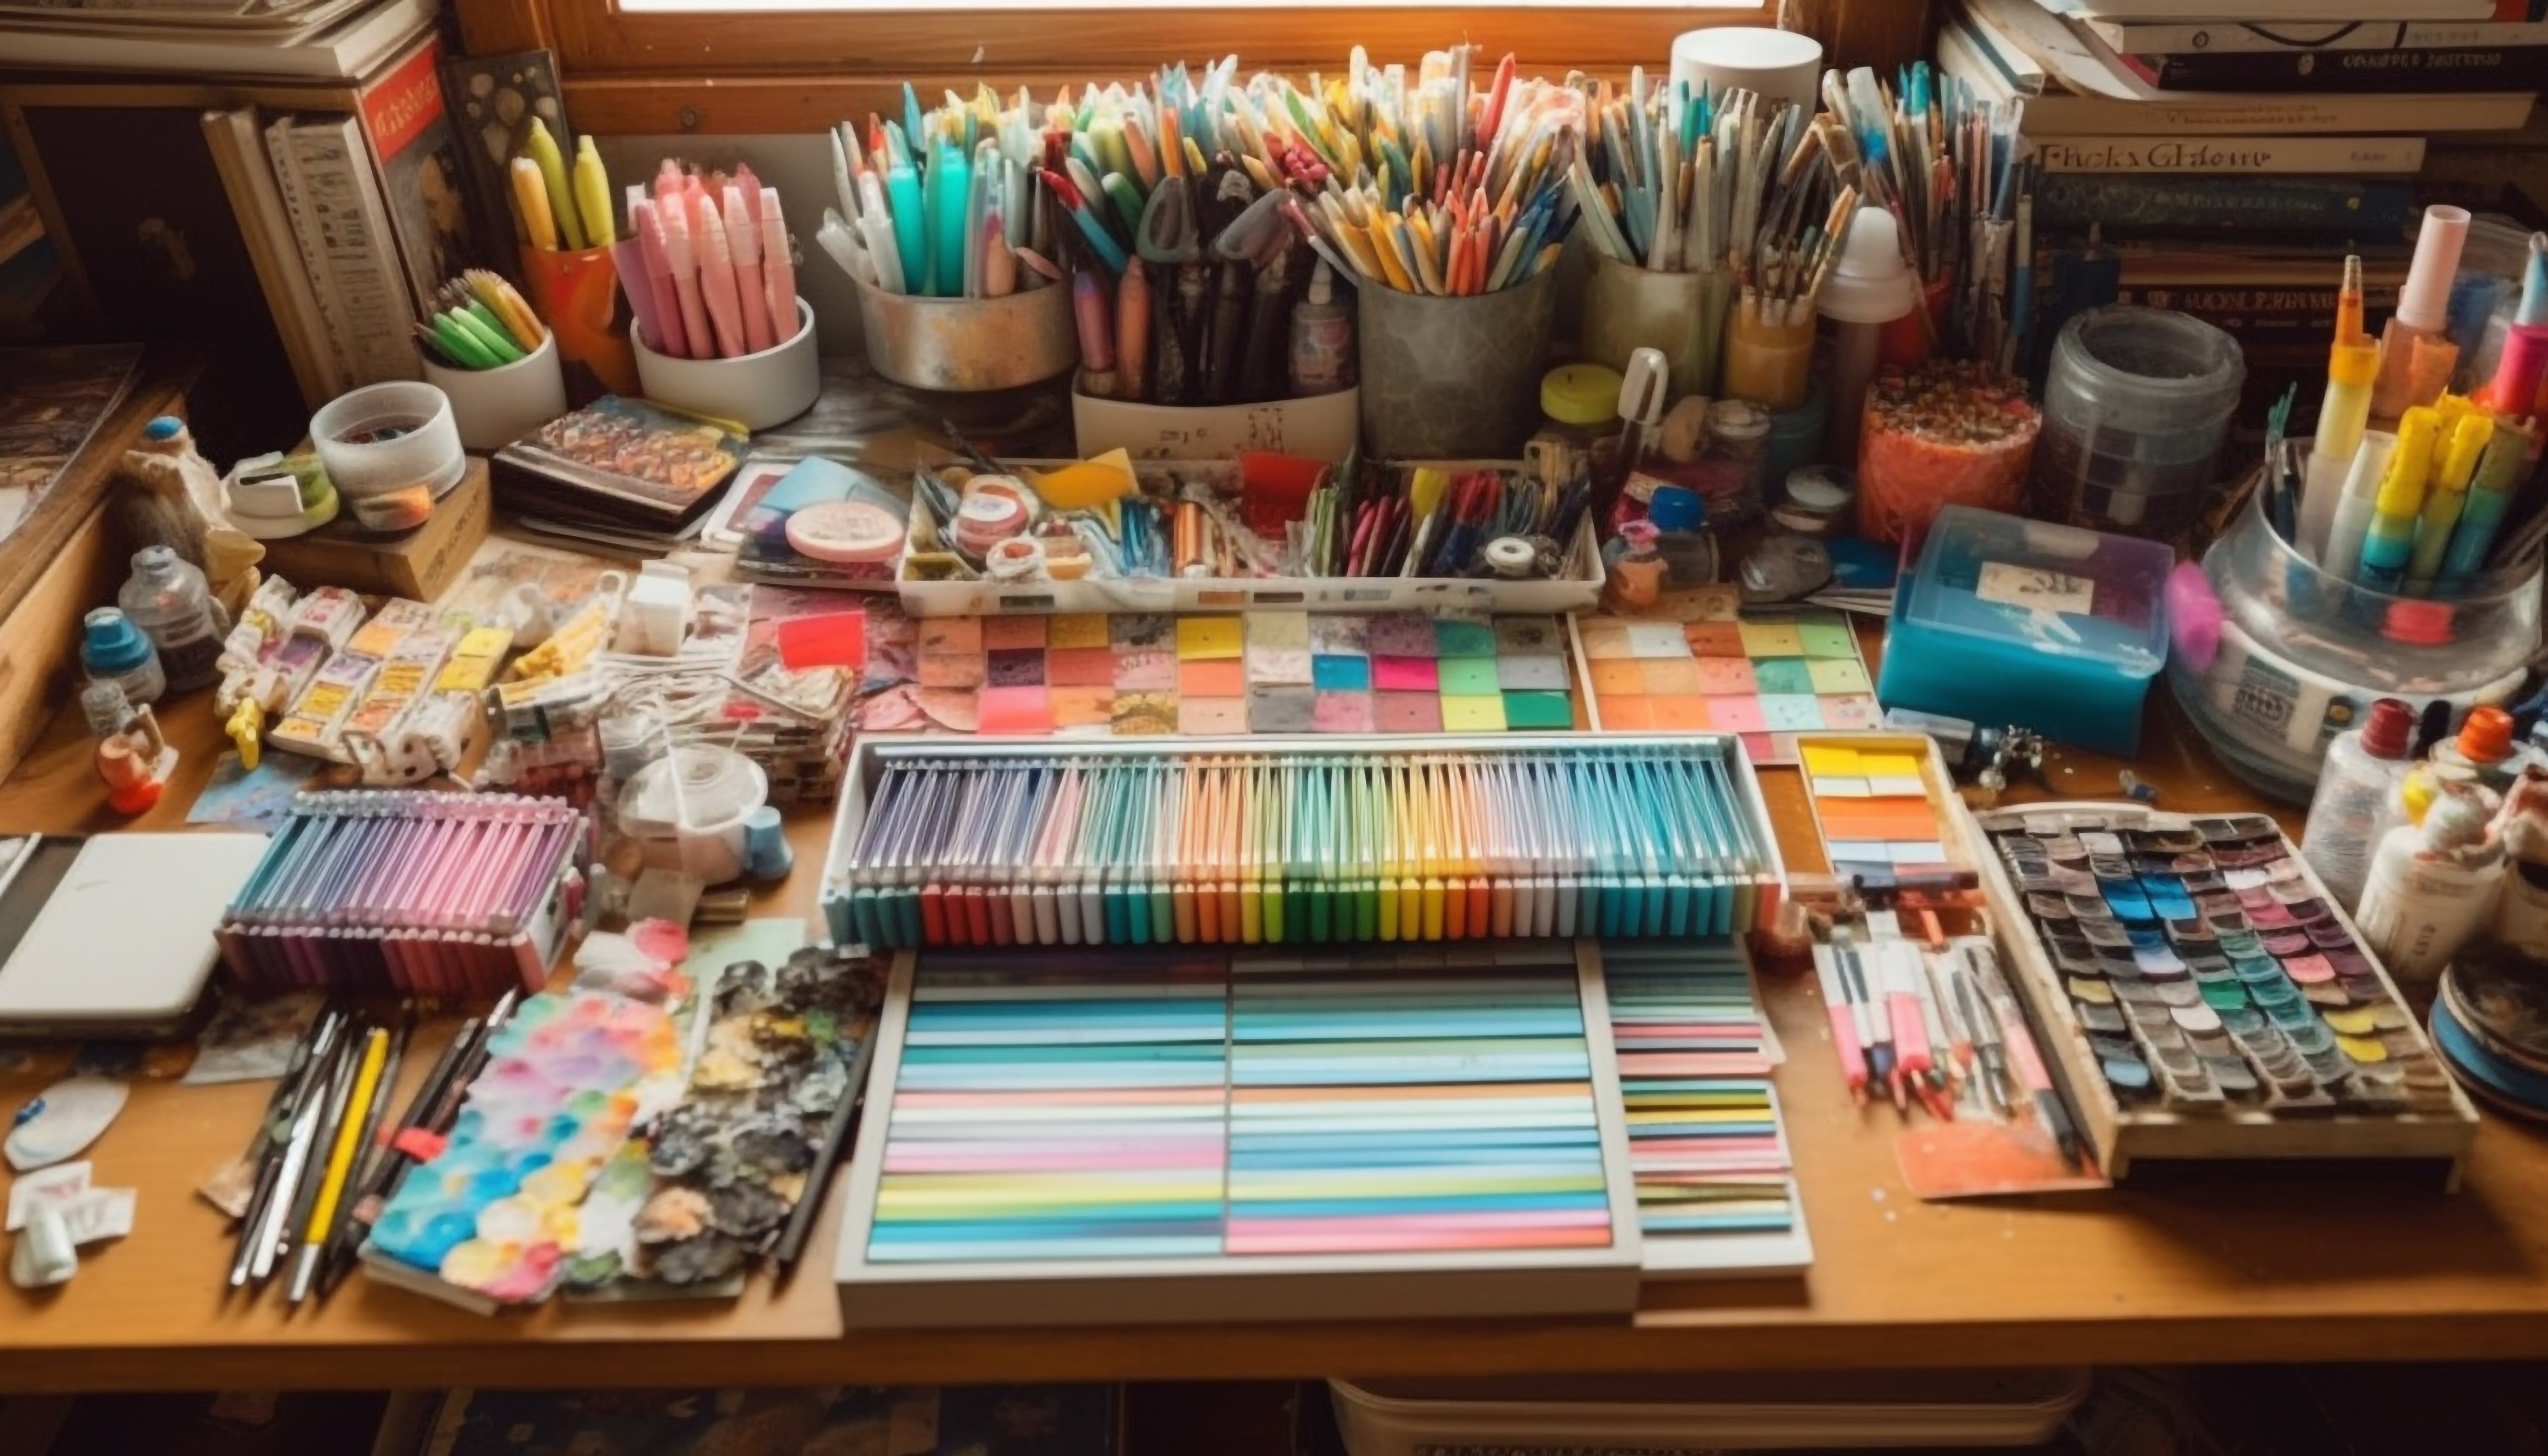 An artist's table, covered with an organized but overwhelming collection on pencils, pens, markers, and so forth